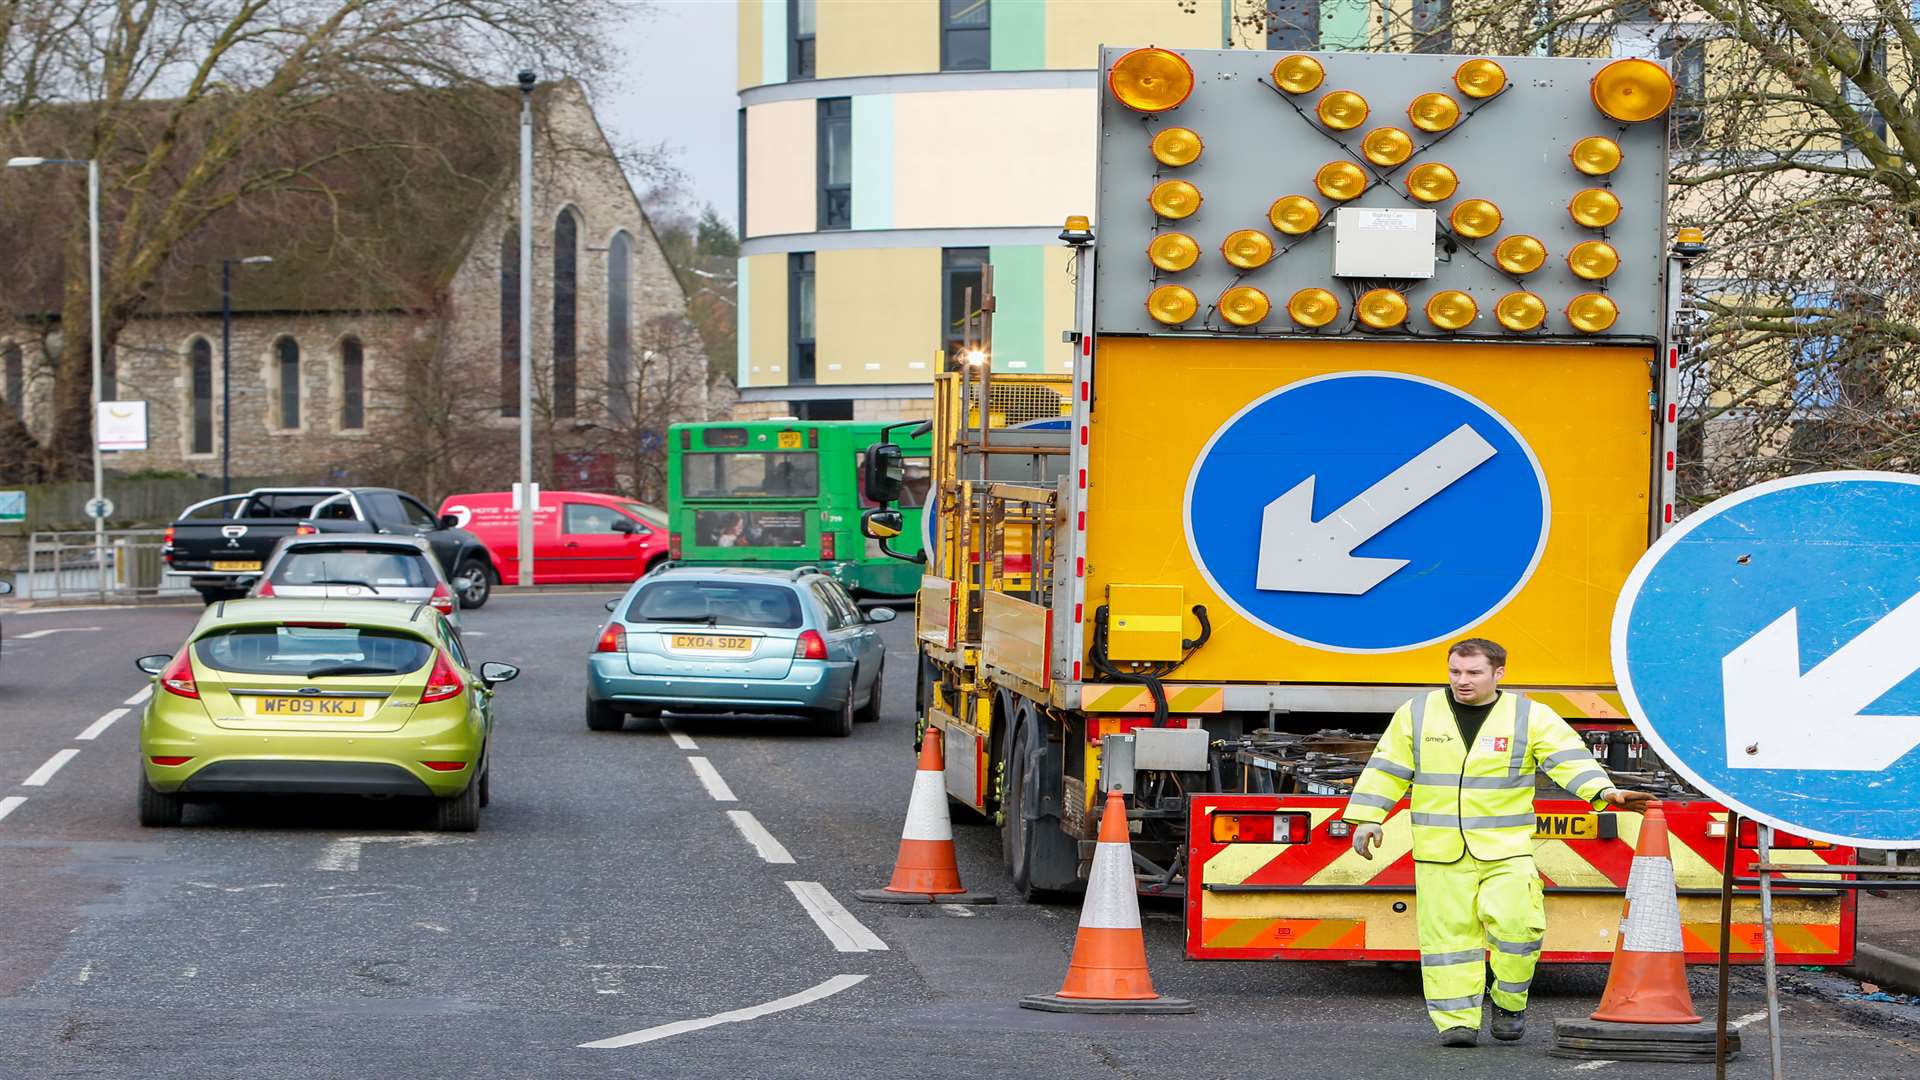 KCC Highways workers put out cones and road signs around Maidstone's gyratory system